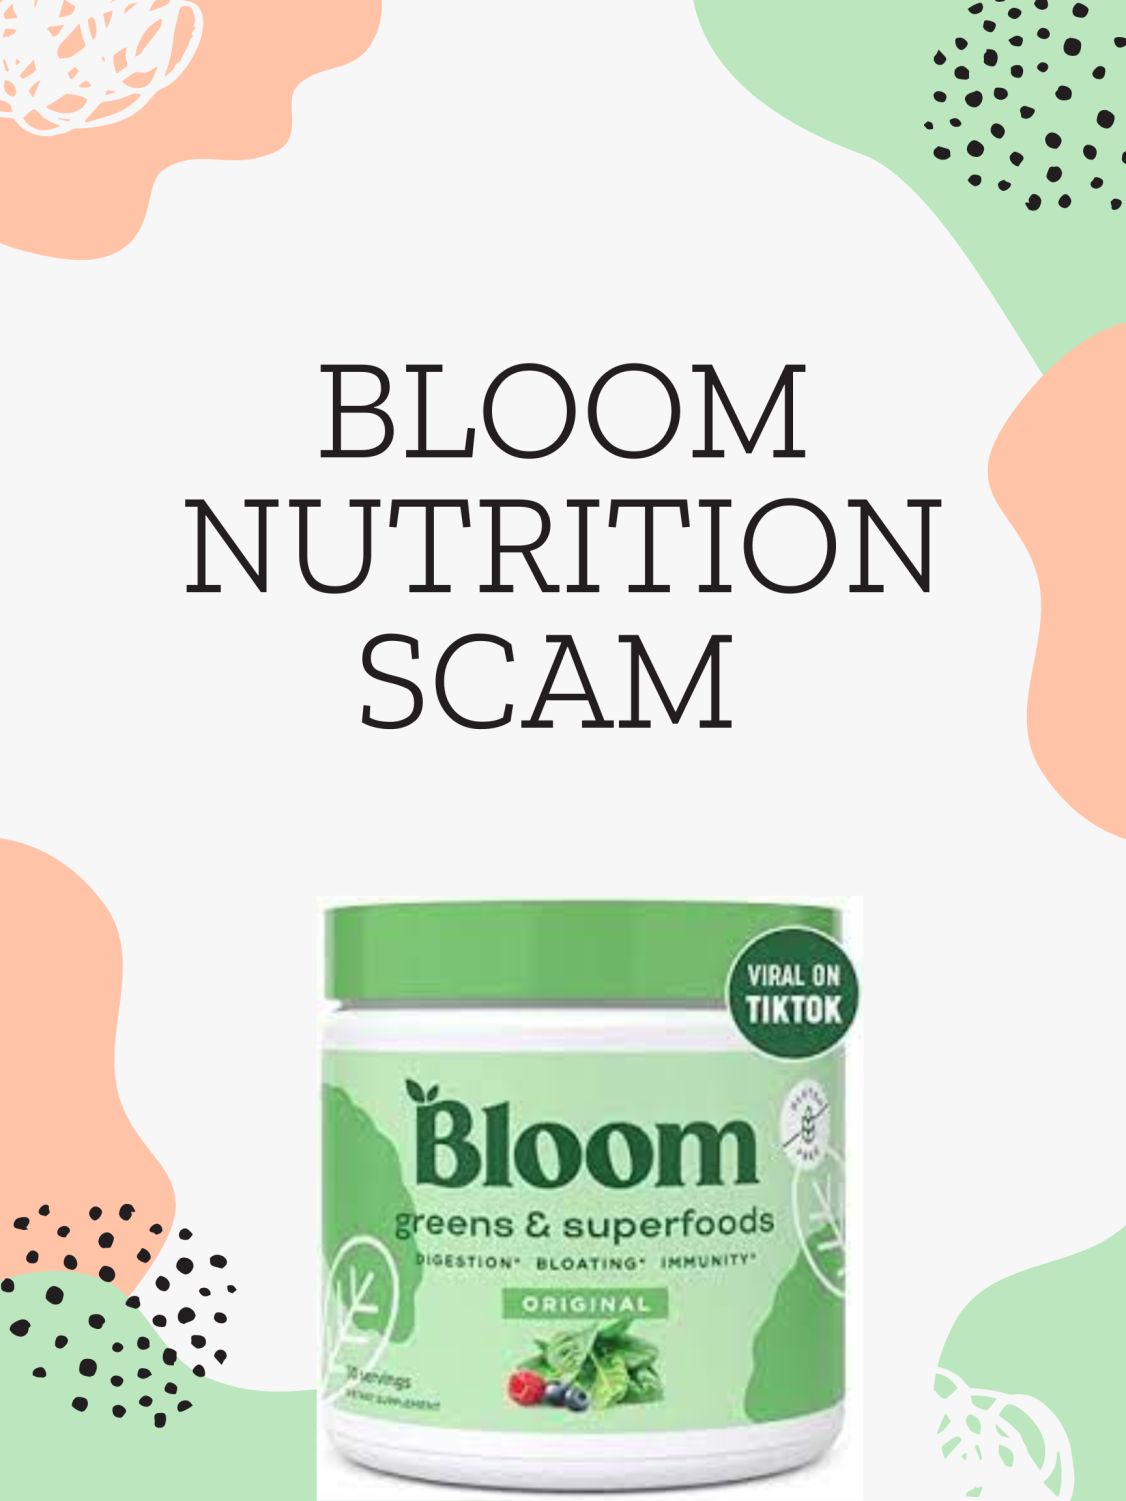 The Bloom Nutrition Scam – The Gator's Eye